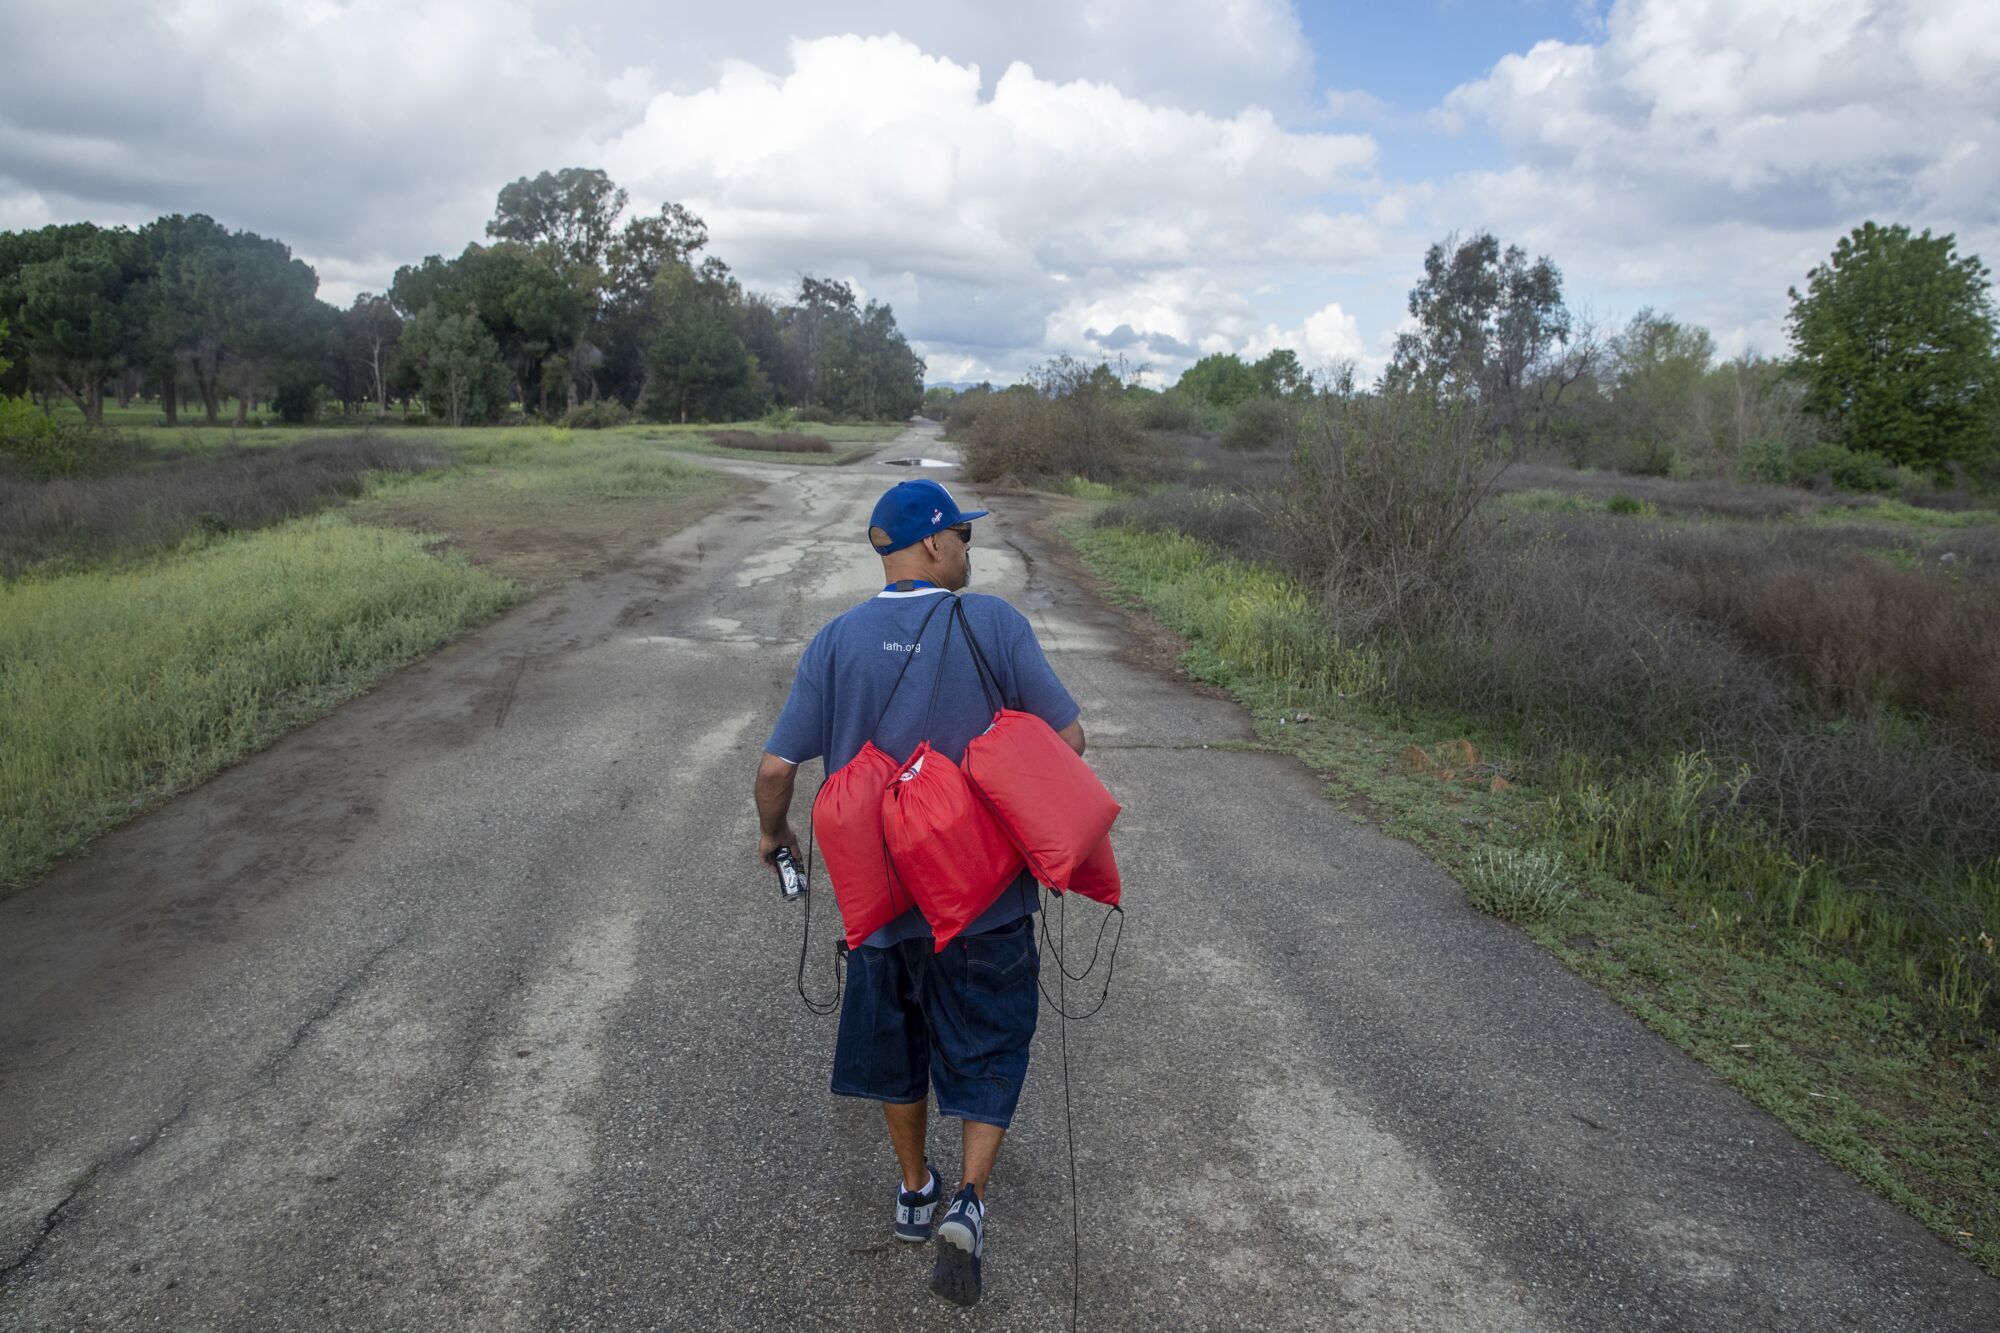 LA Family Housing outreach coordinator Eric Montoya walks out into the Sepulveda Dam Recreation Area to conduct interviews with homeless people camped in the Sepulveda Basin in Encino.